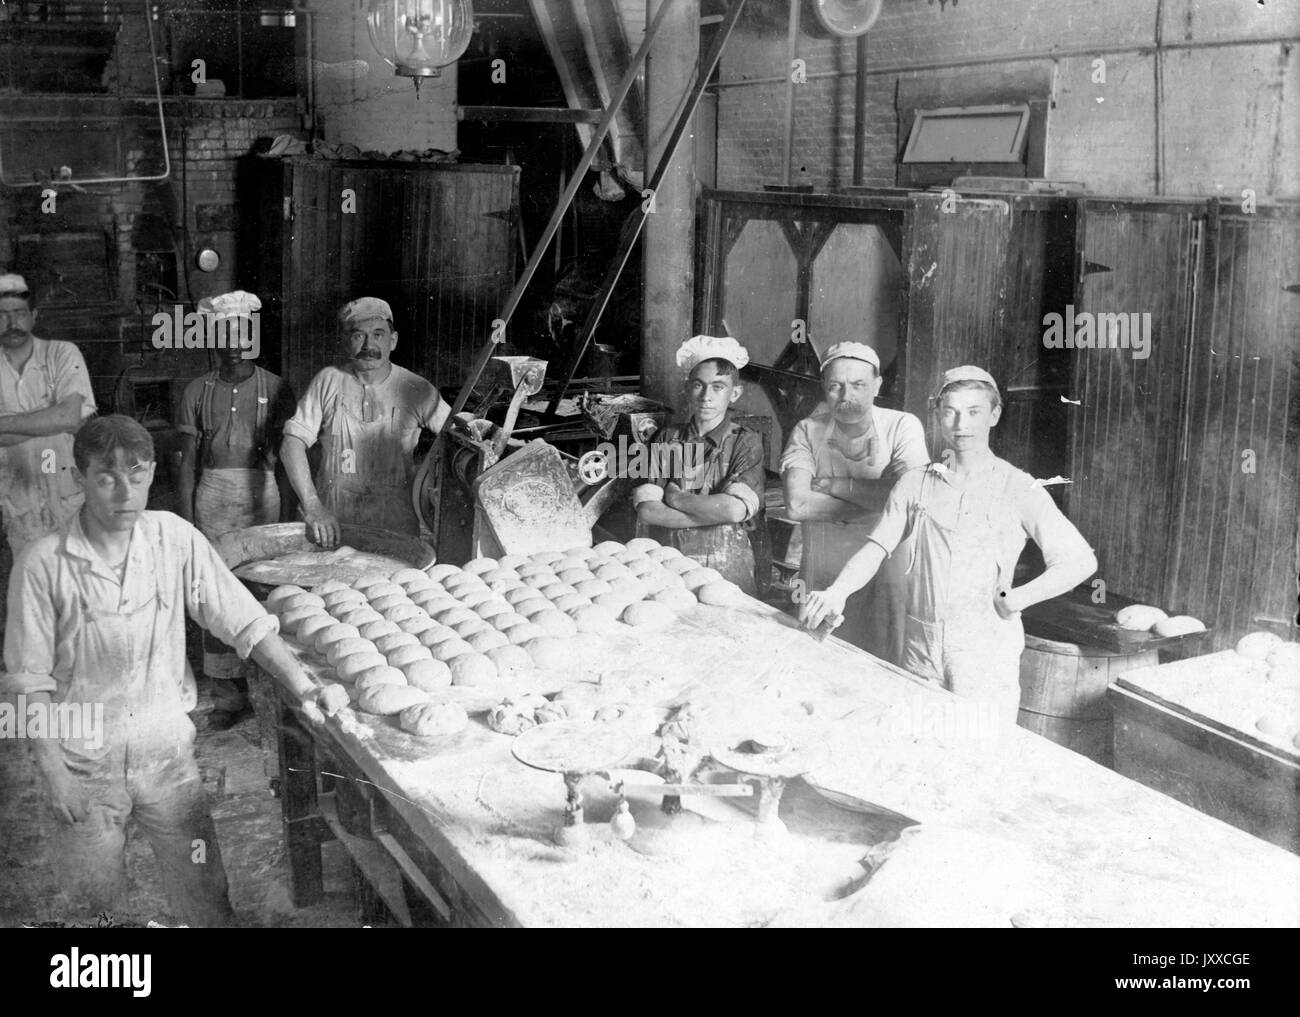 Portrait of seven bakers, standing behind a large table of kneaded dough, working in a brick cellar, wearing white hats, all looking up from their labor, 1920. Stock Photo